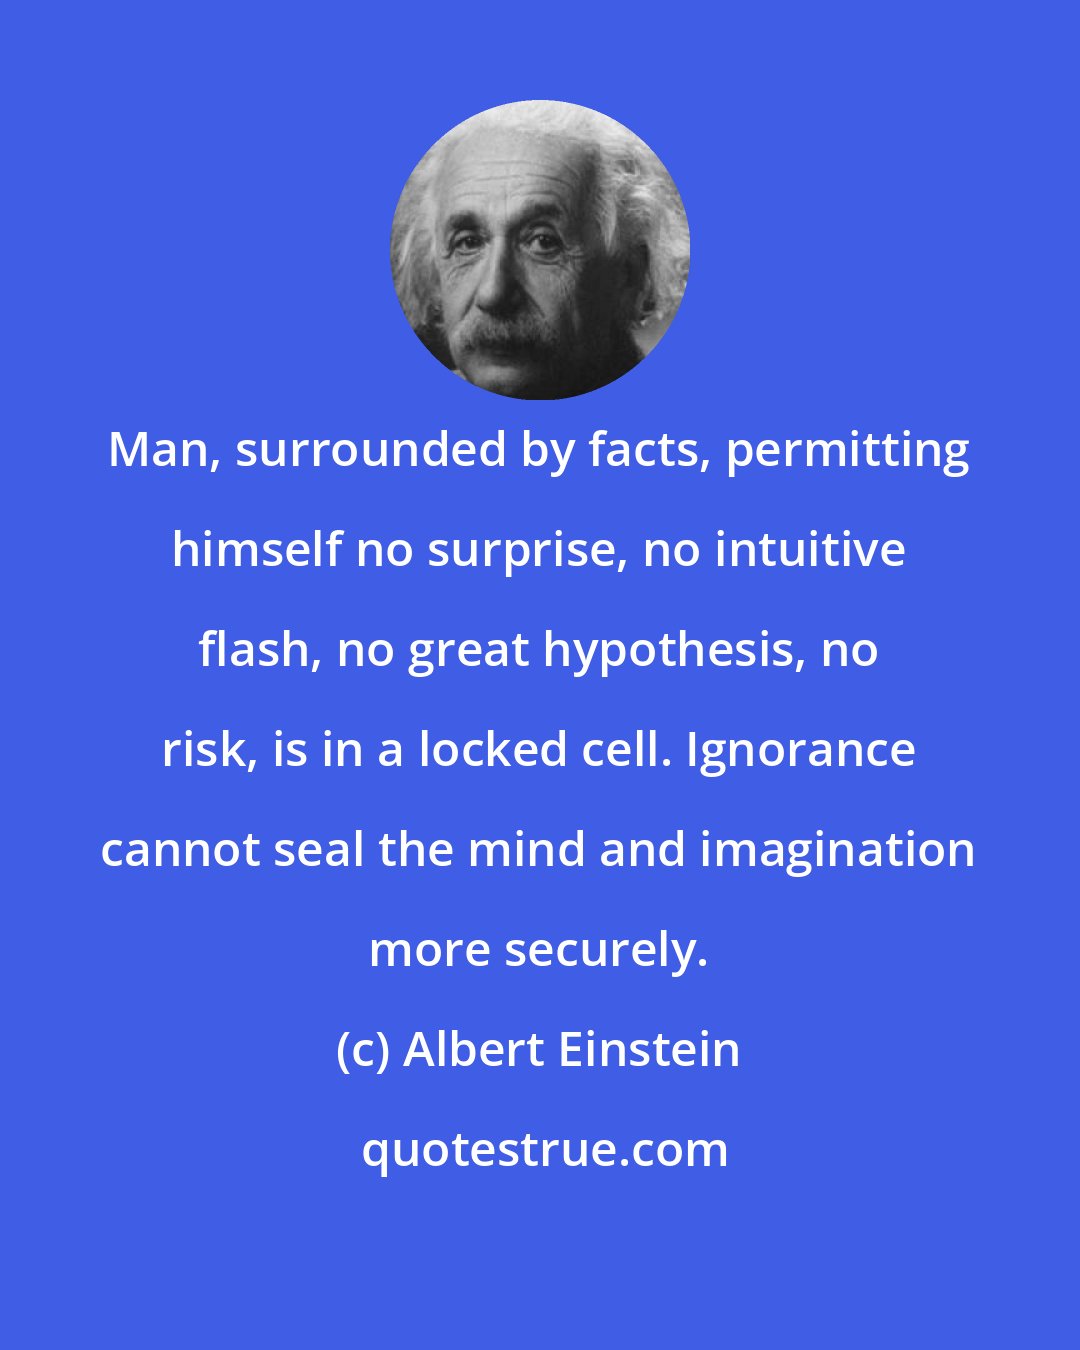 Albert Einstein: Man, surrounded by facts, permitting himself no surprise, no intuitive flash, no great hypothesis, no risk, is in a locked cell. Ignorance cannot seal the mind and imagination more securely.